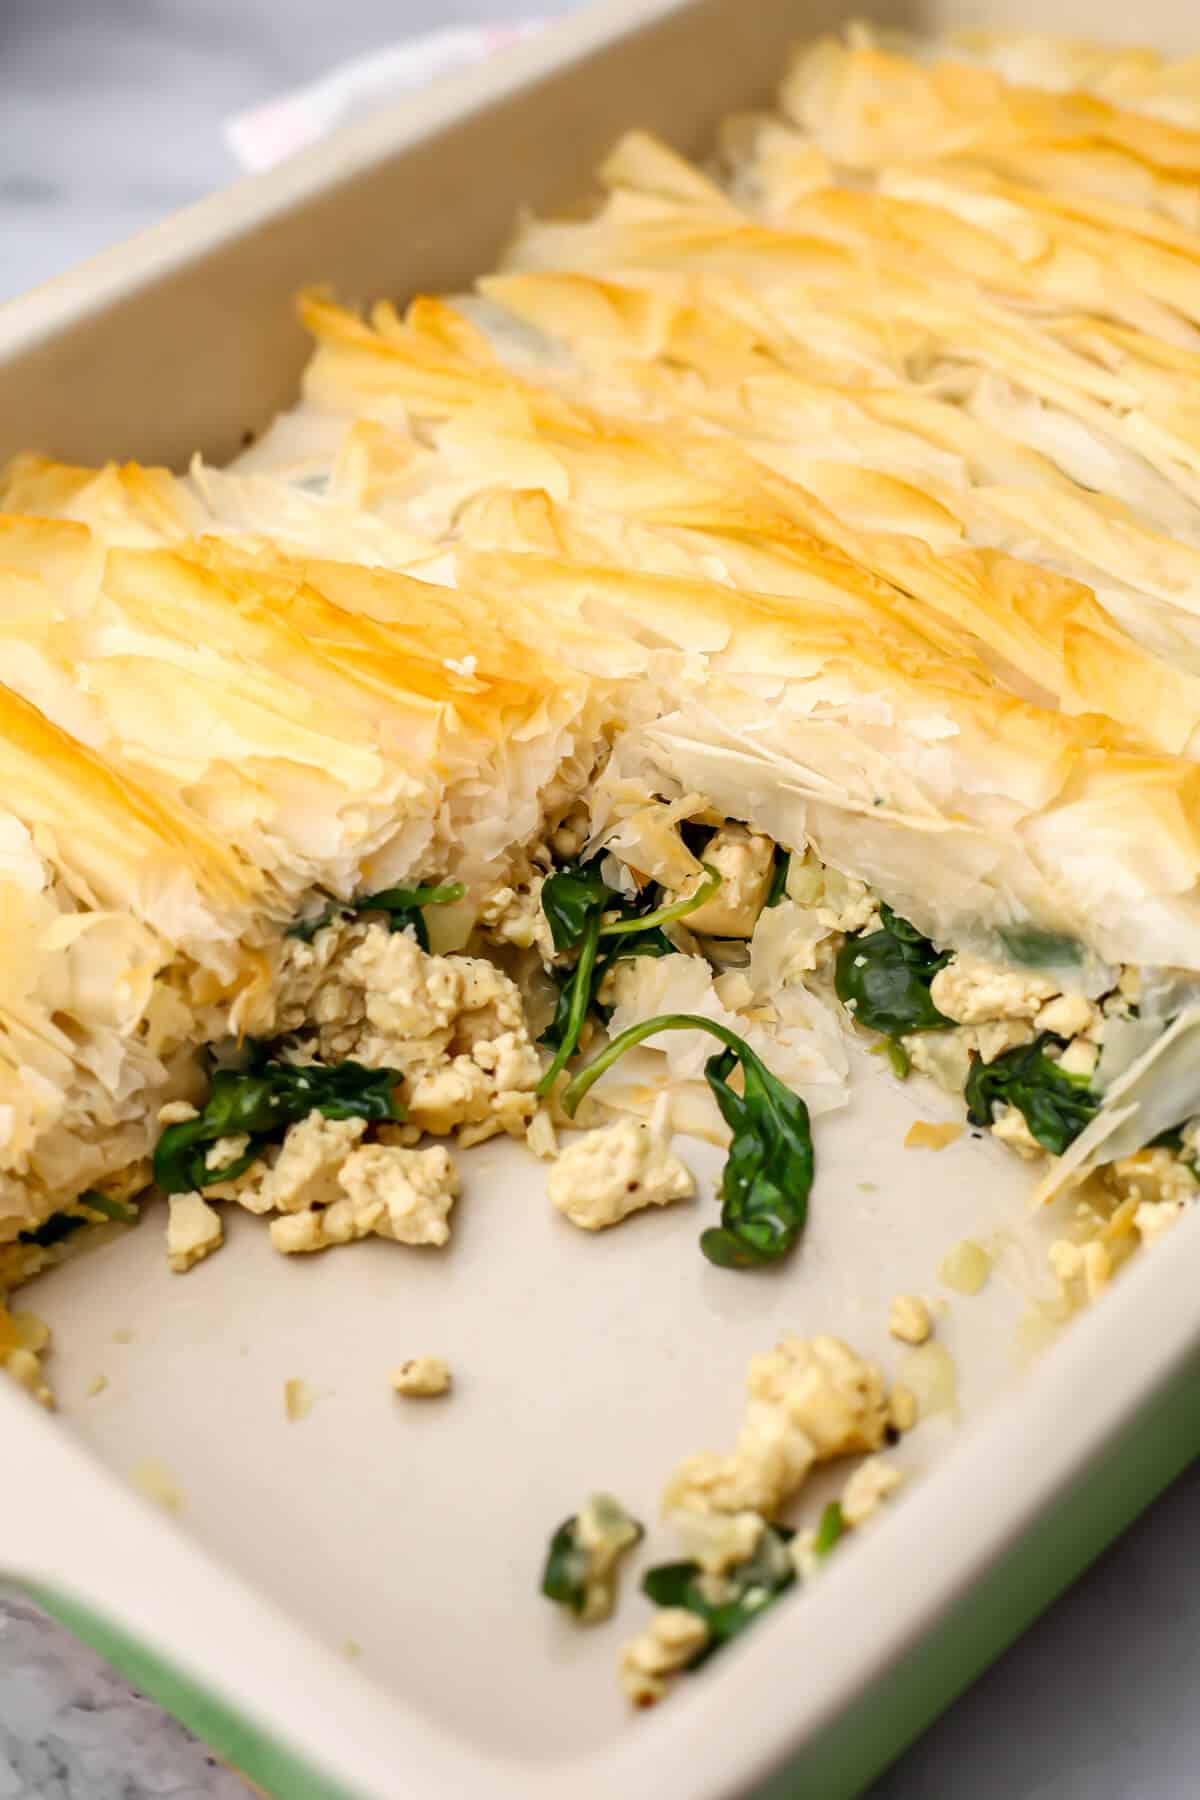 If using filo - bake at 375° F (190° C) for 15 minutes.  If using puff pastry - bake at 400° F (204° C) for 25 minutes until it puffs up and turns golden brown. 